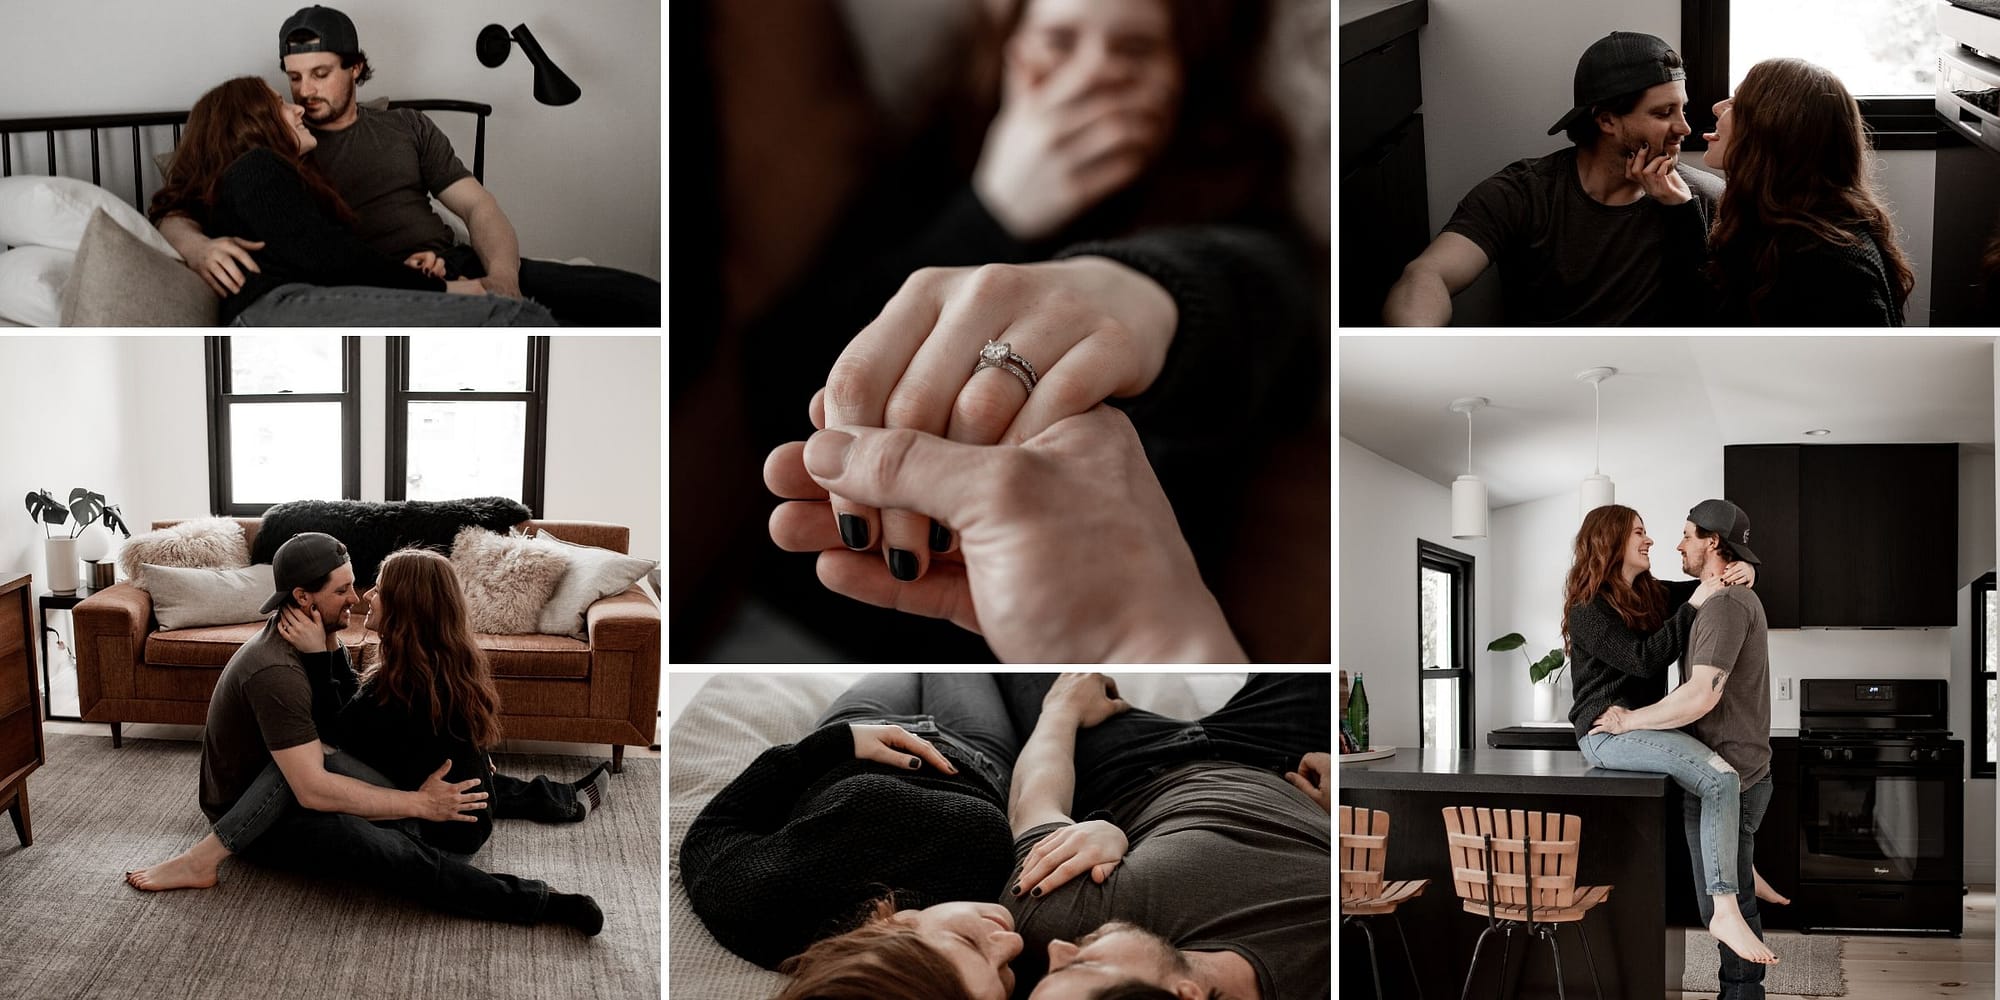 Lake Placid engagement photographer, Lake Placid engagement photos in an Airbnb